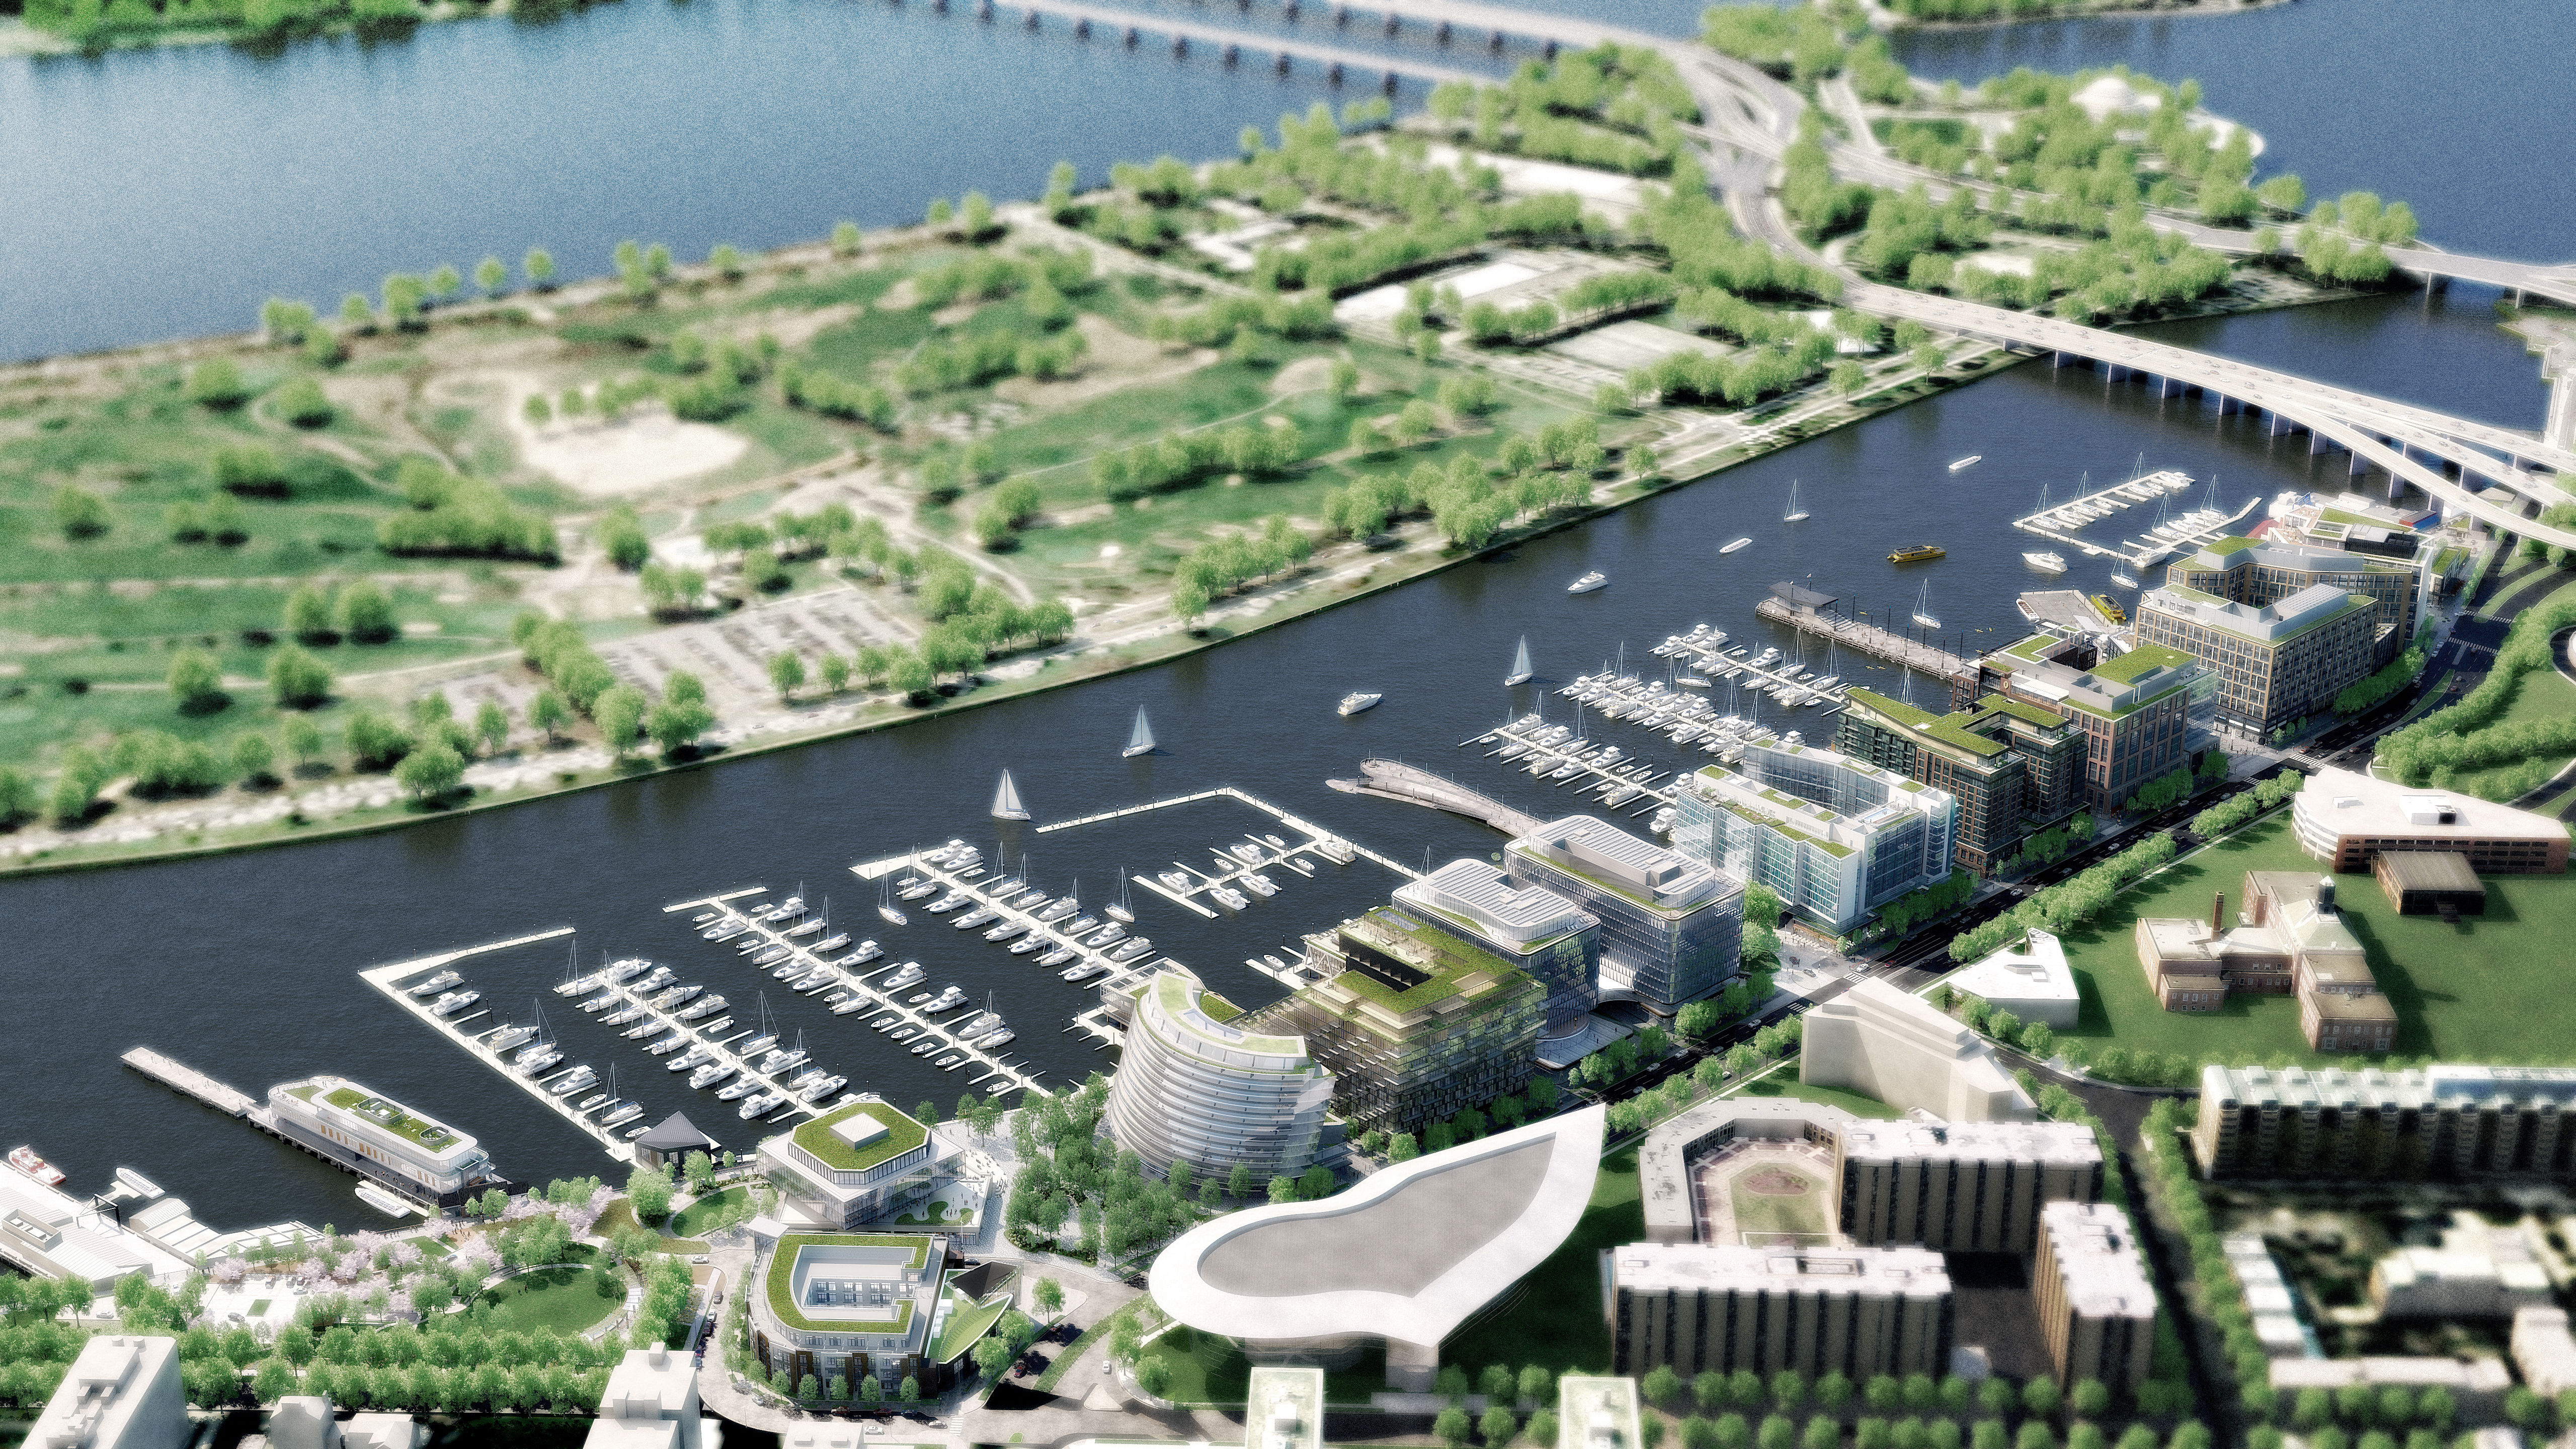 Phase II plans also include 250 boat slips. (Courtesy PN Hoffman)